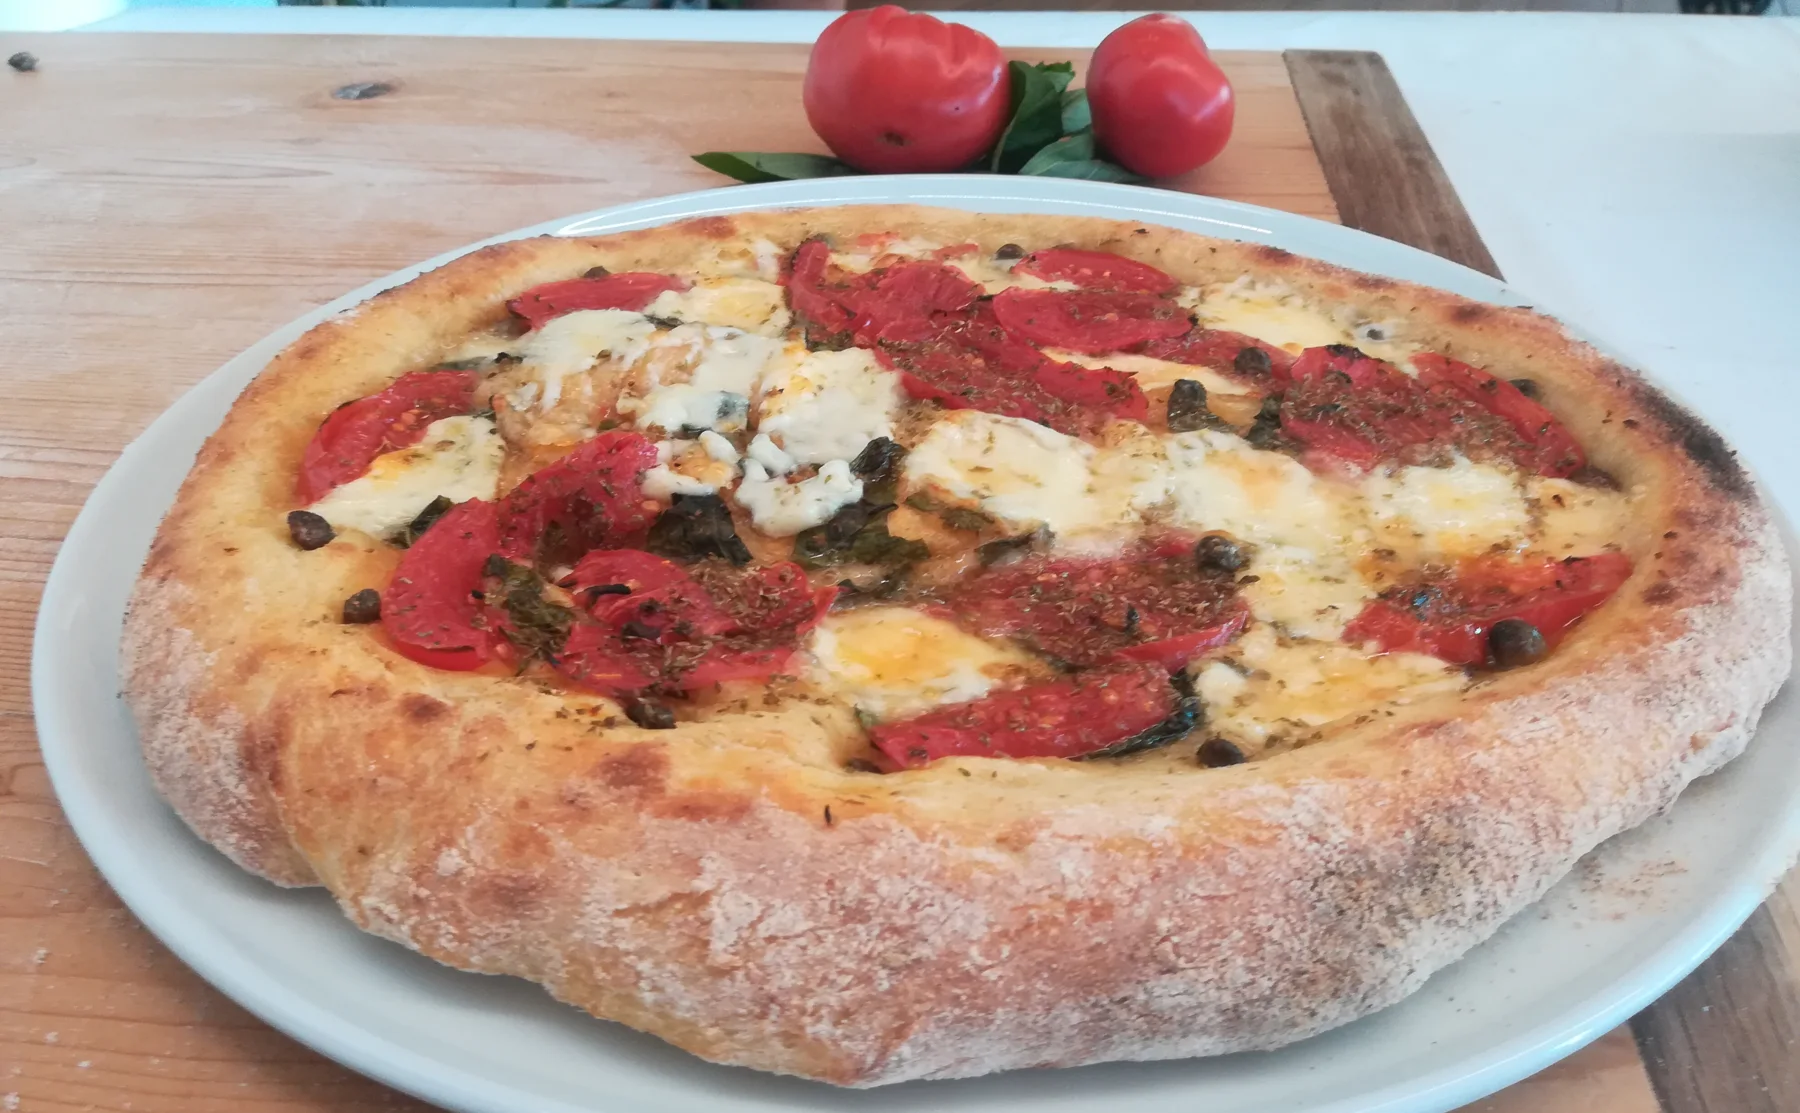  Let's learn how to make Pizza, Bread and Focaccia in the Italian way - 1478329